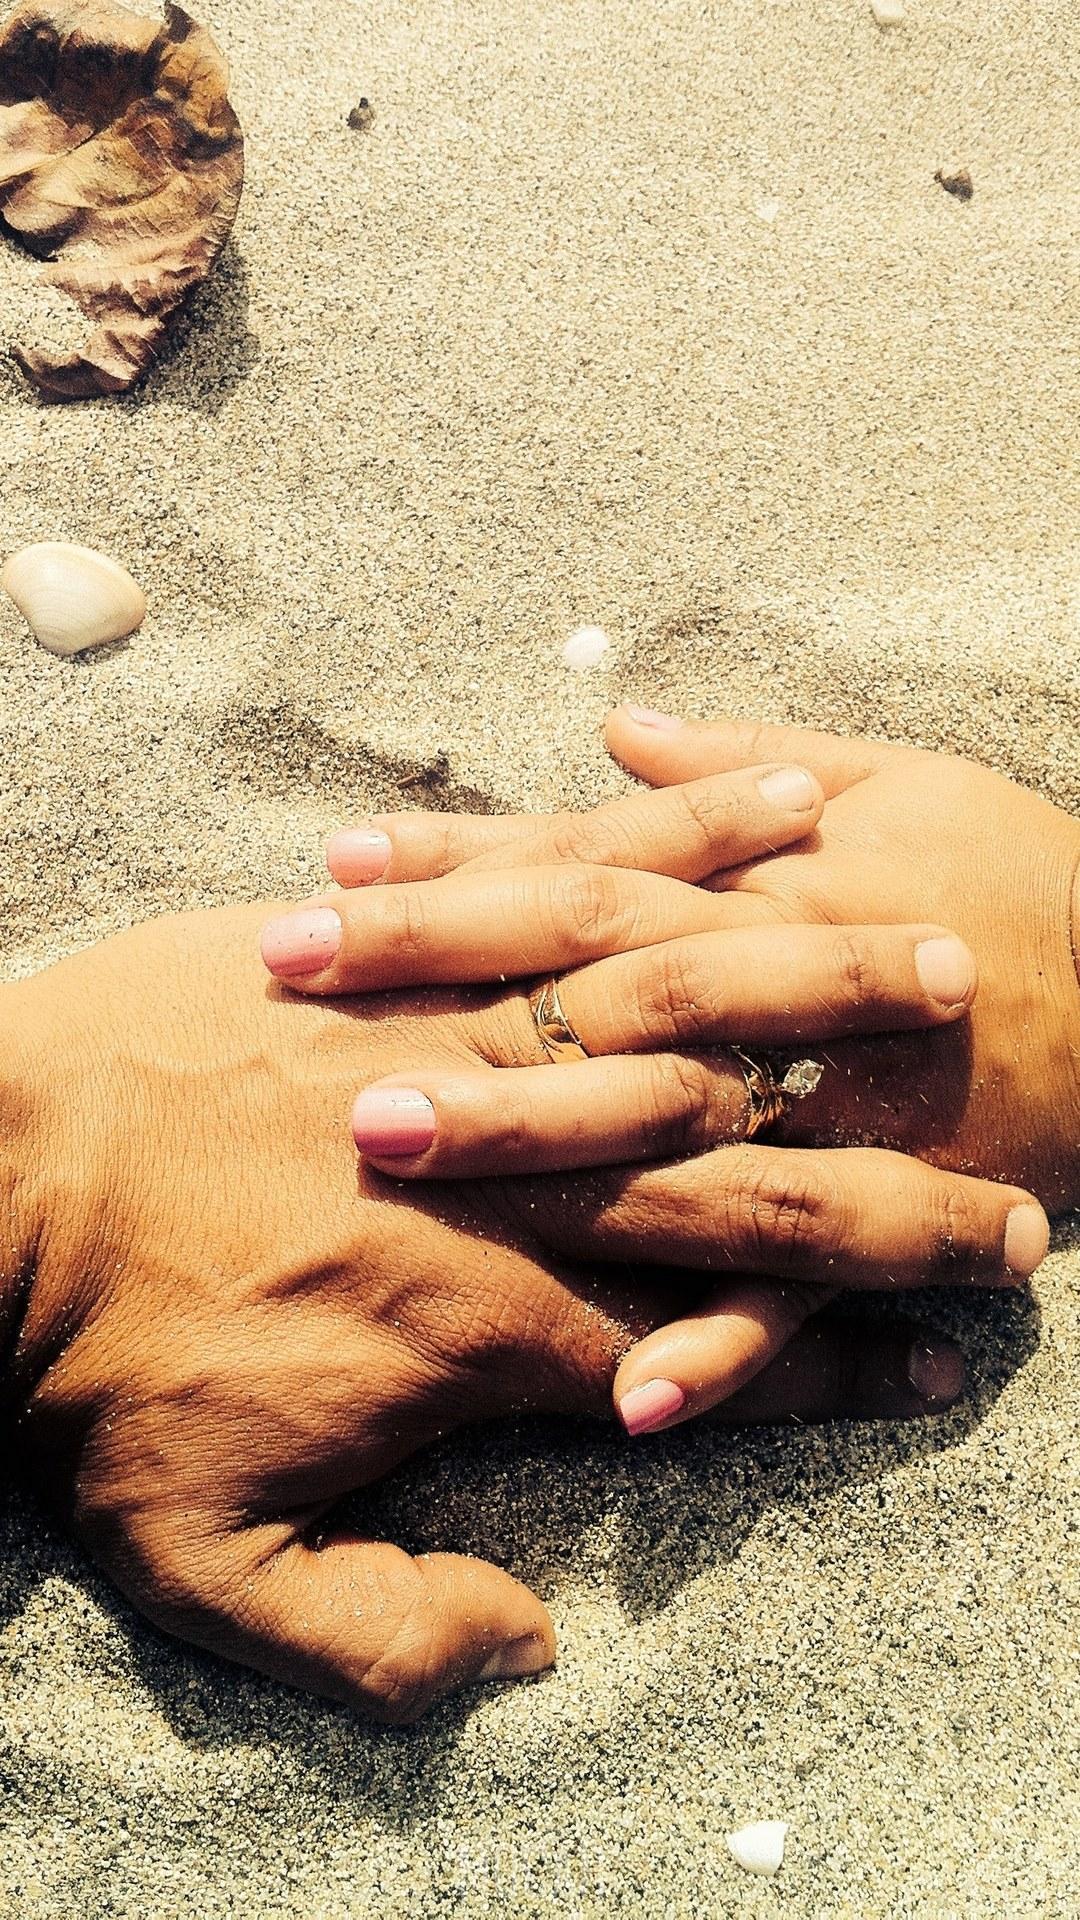 HD wallpaper, A Married Couple At The Beach Wearing Wedding Rings Holds Hands On The Sand, Lovers Hands On Sand, Huawei P9 Lite Background Hd, 1080X1920